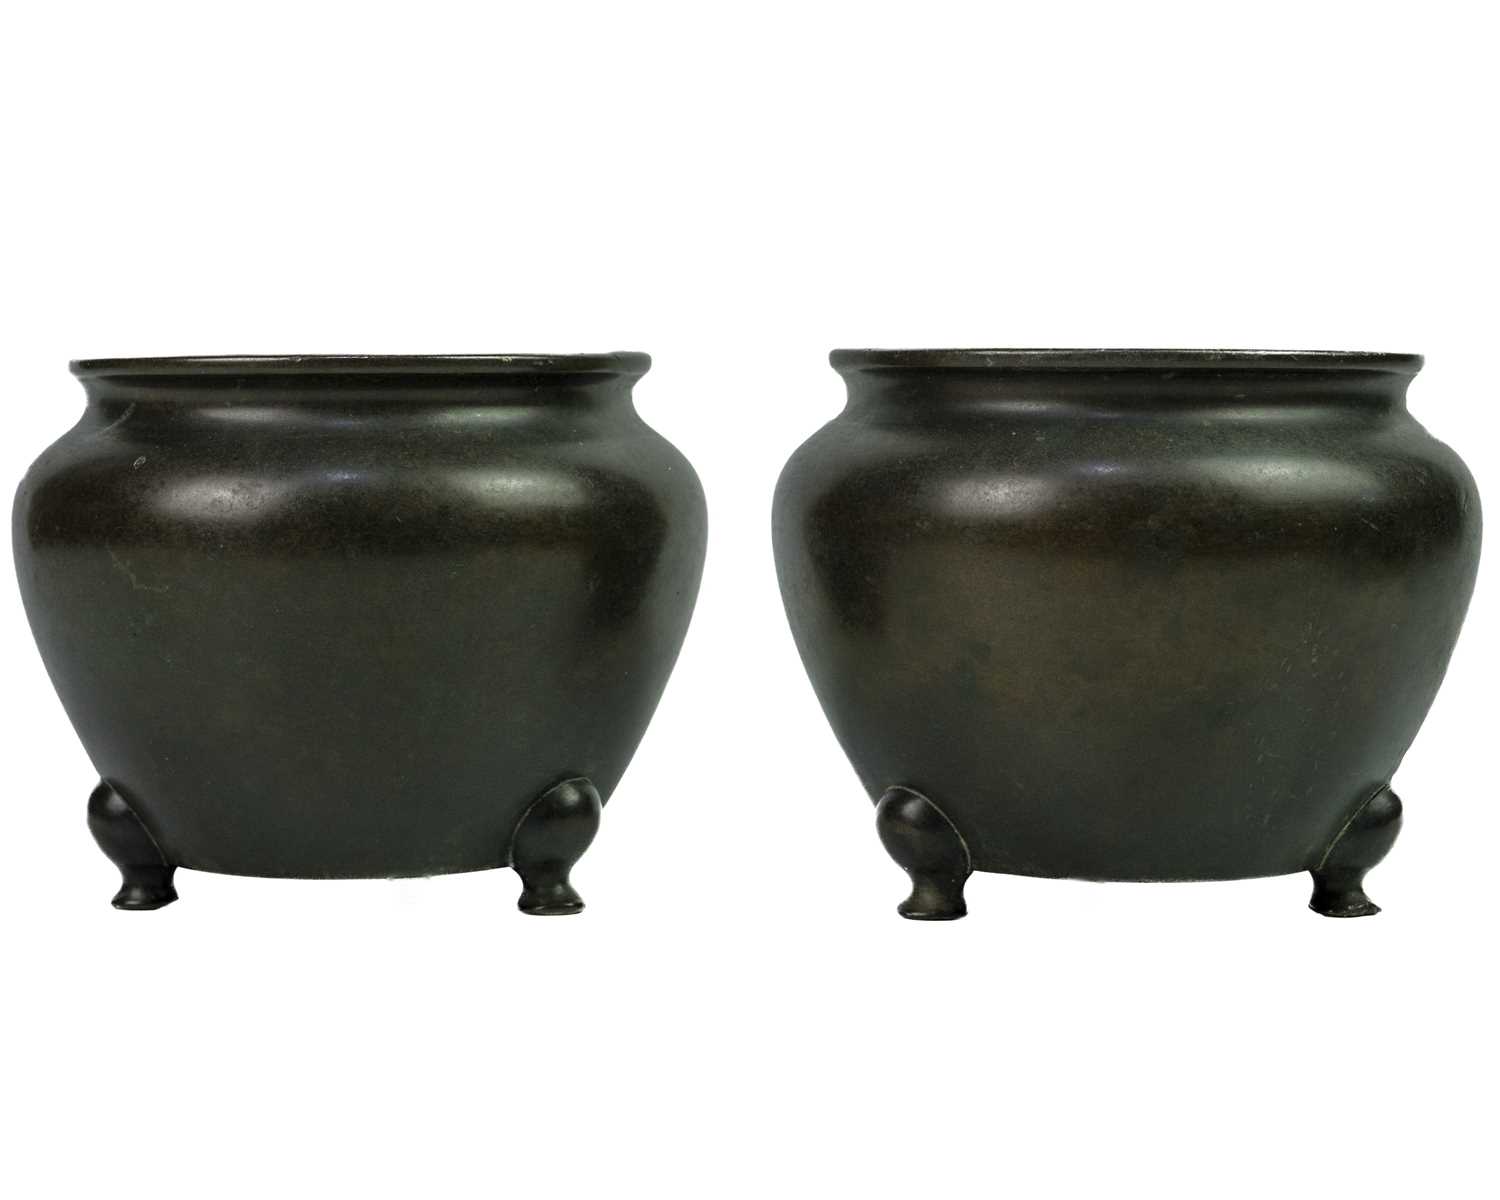 A pair of Chinese bronze censers, Qing Dynasty.